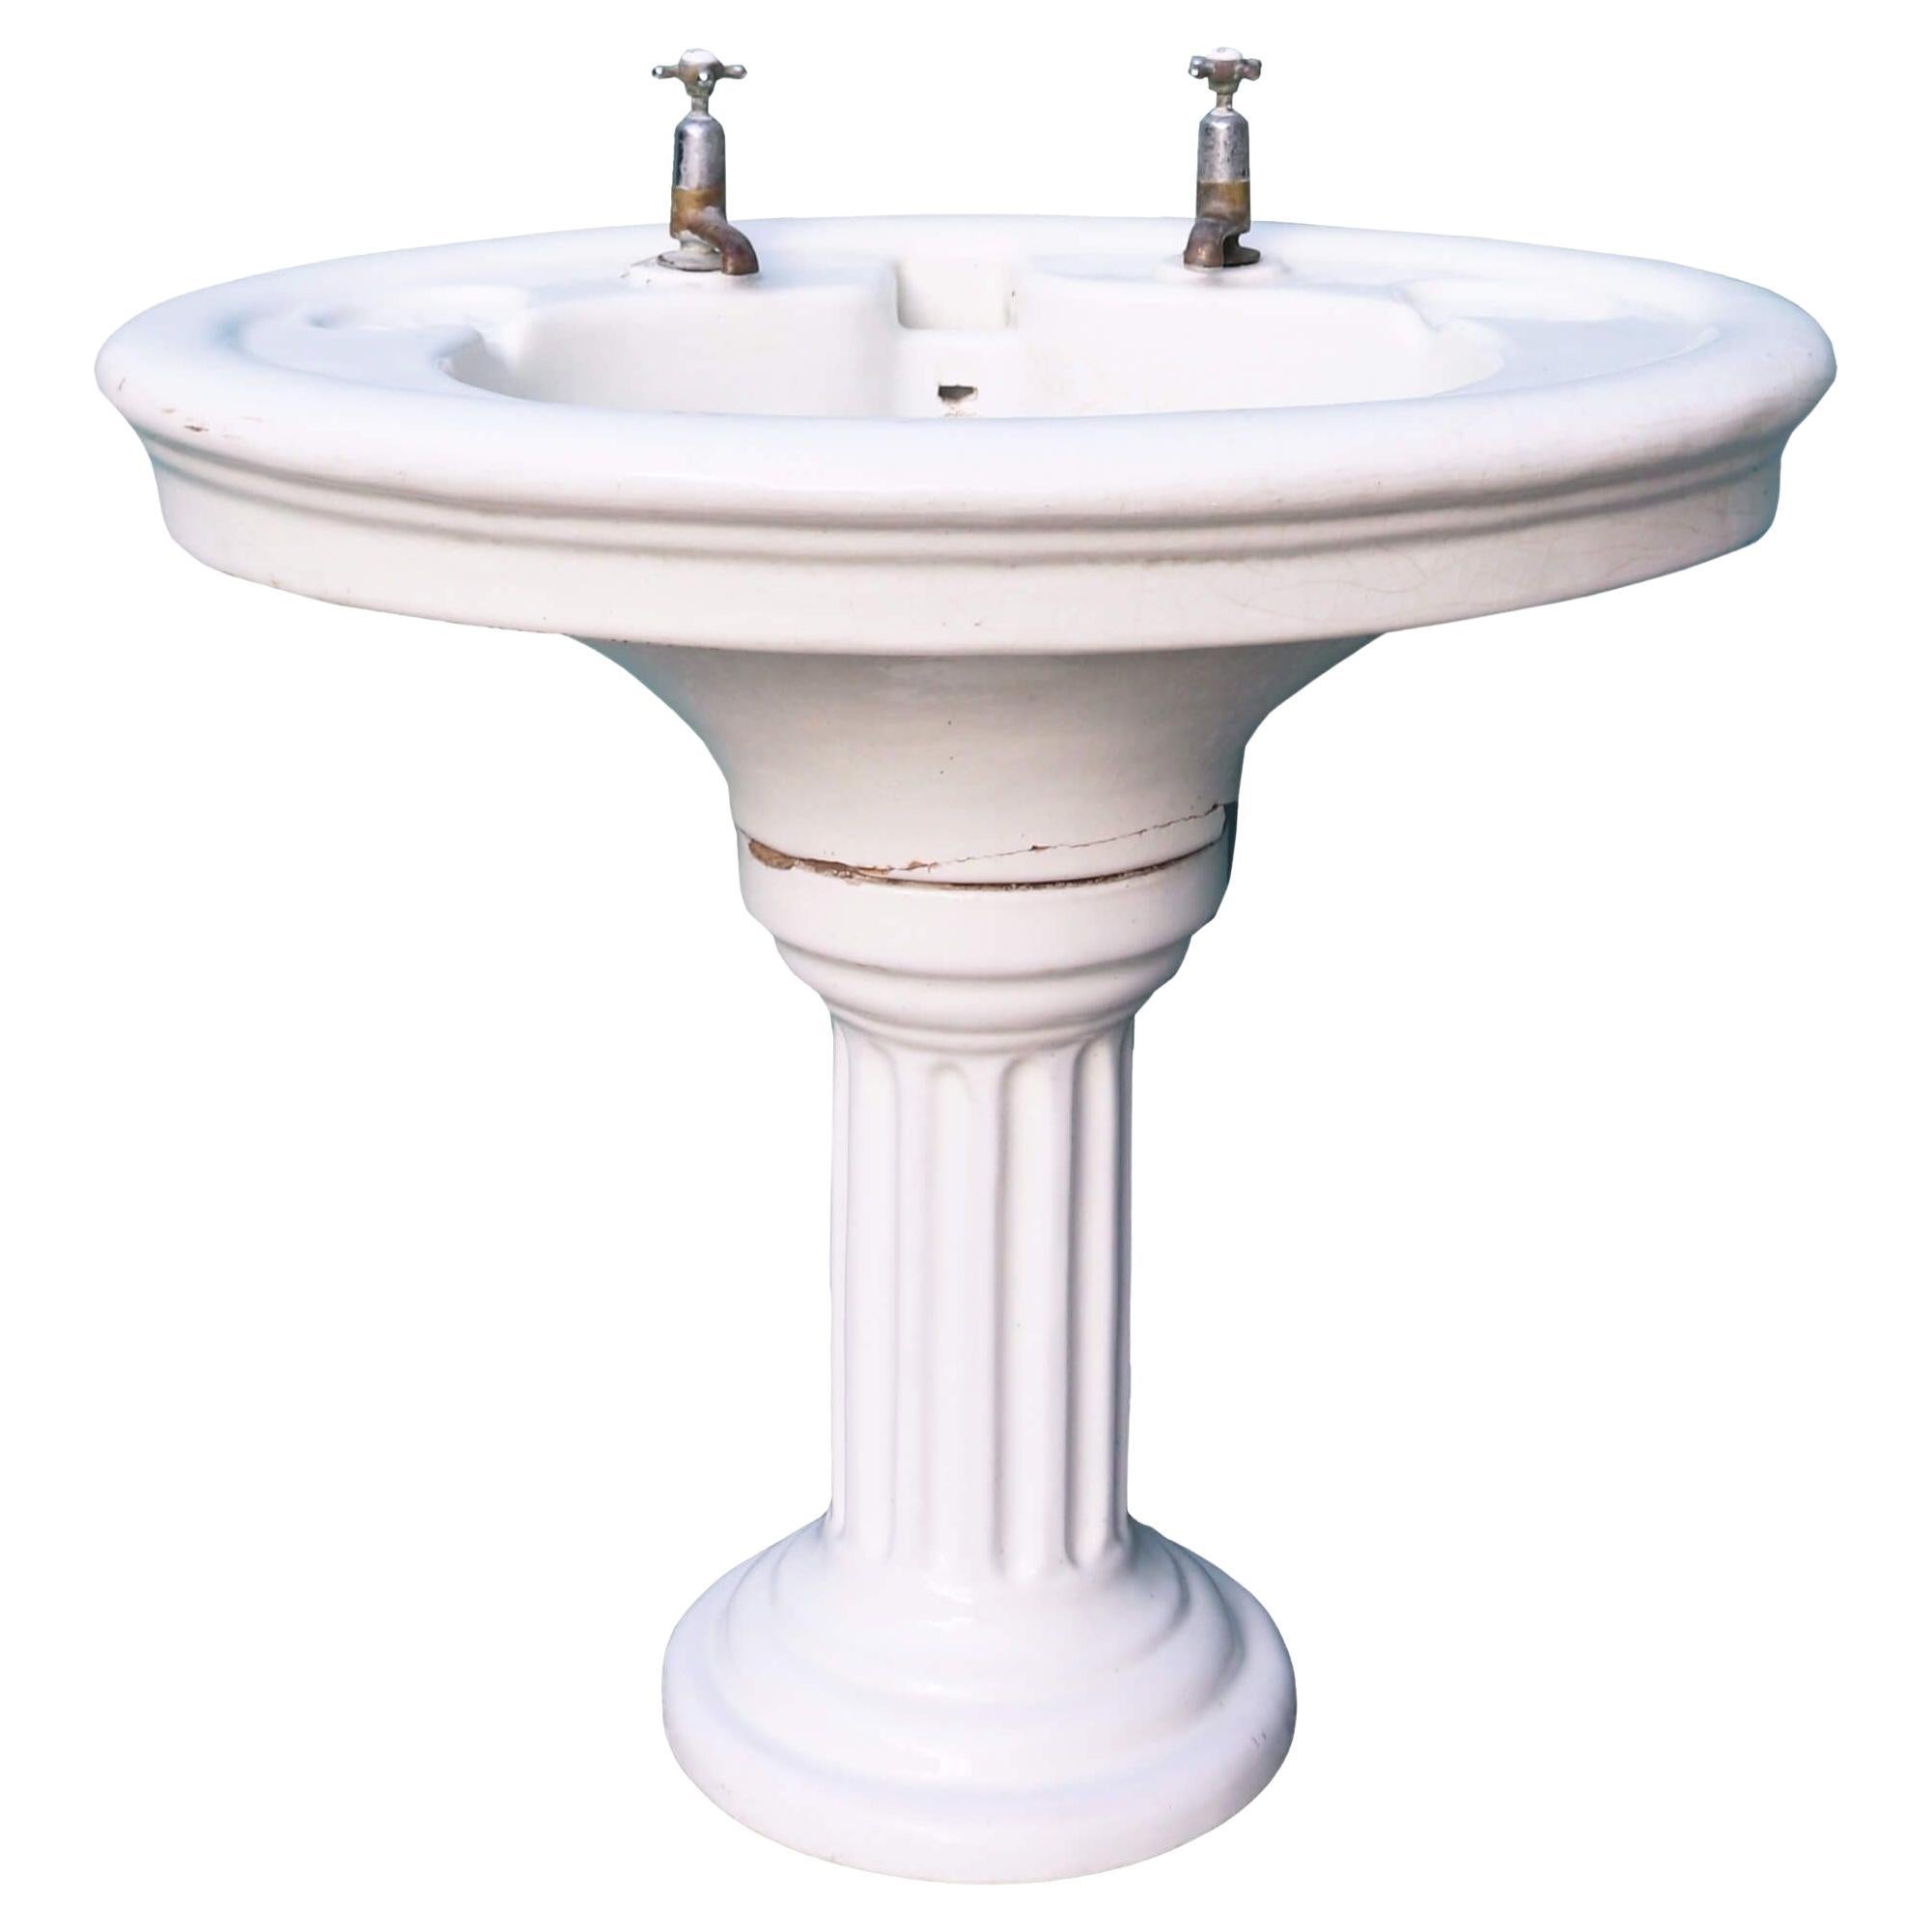 Reclaimed Doulton & Co Antique Pedestal Washstand For Sale